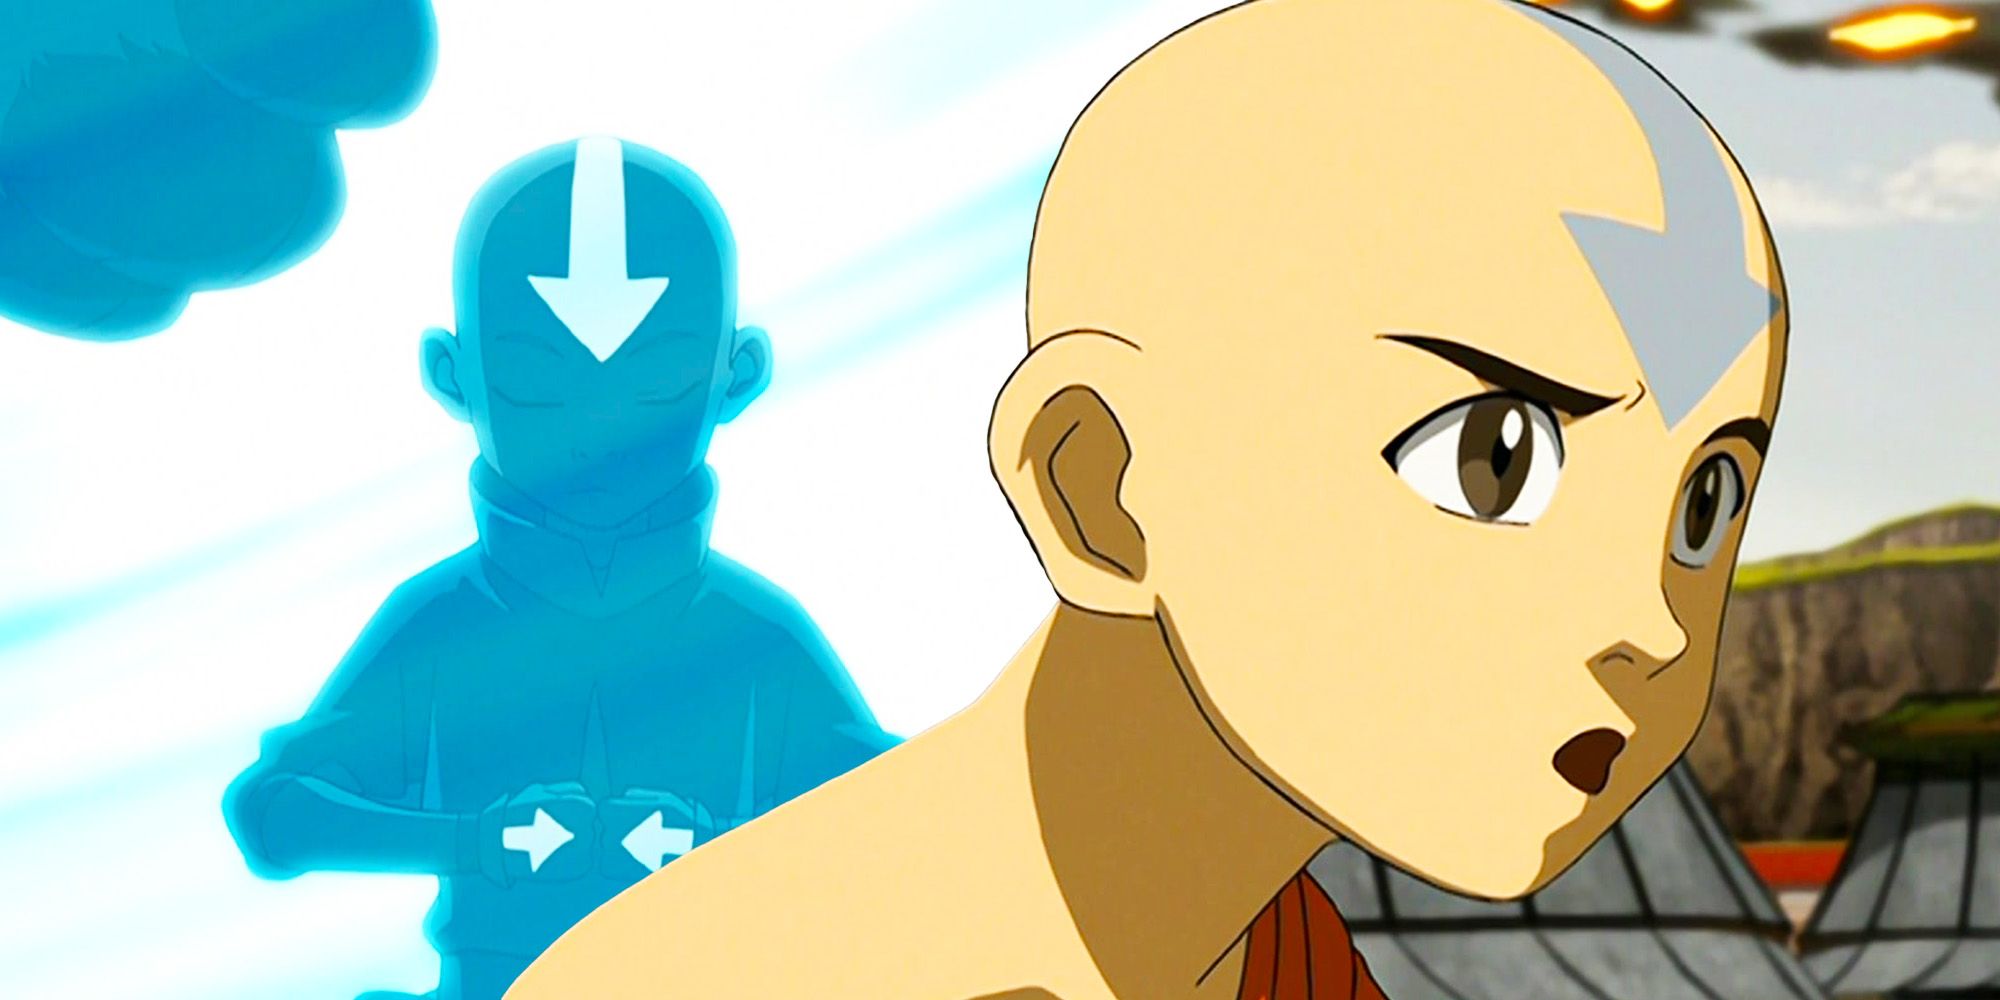 Aang in ice and Aang out of ice in Avatar The Last Airbender animated series